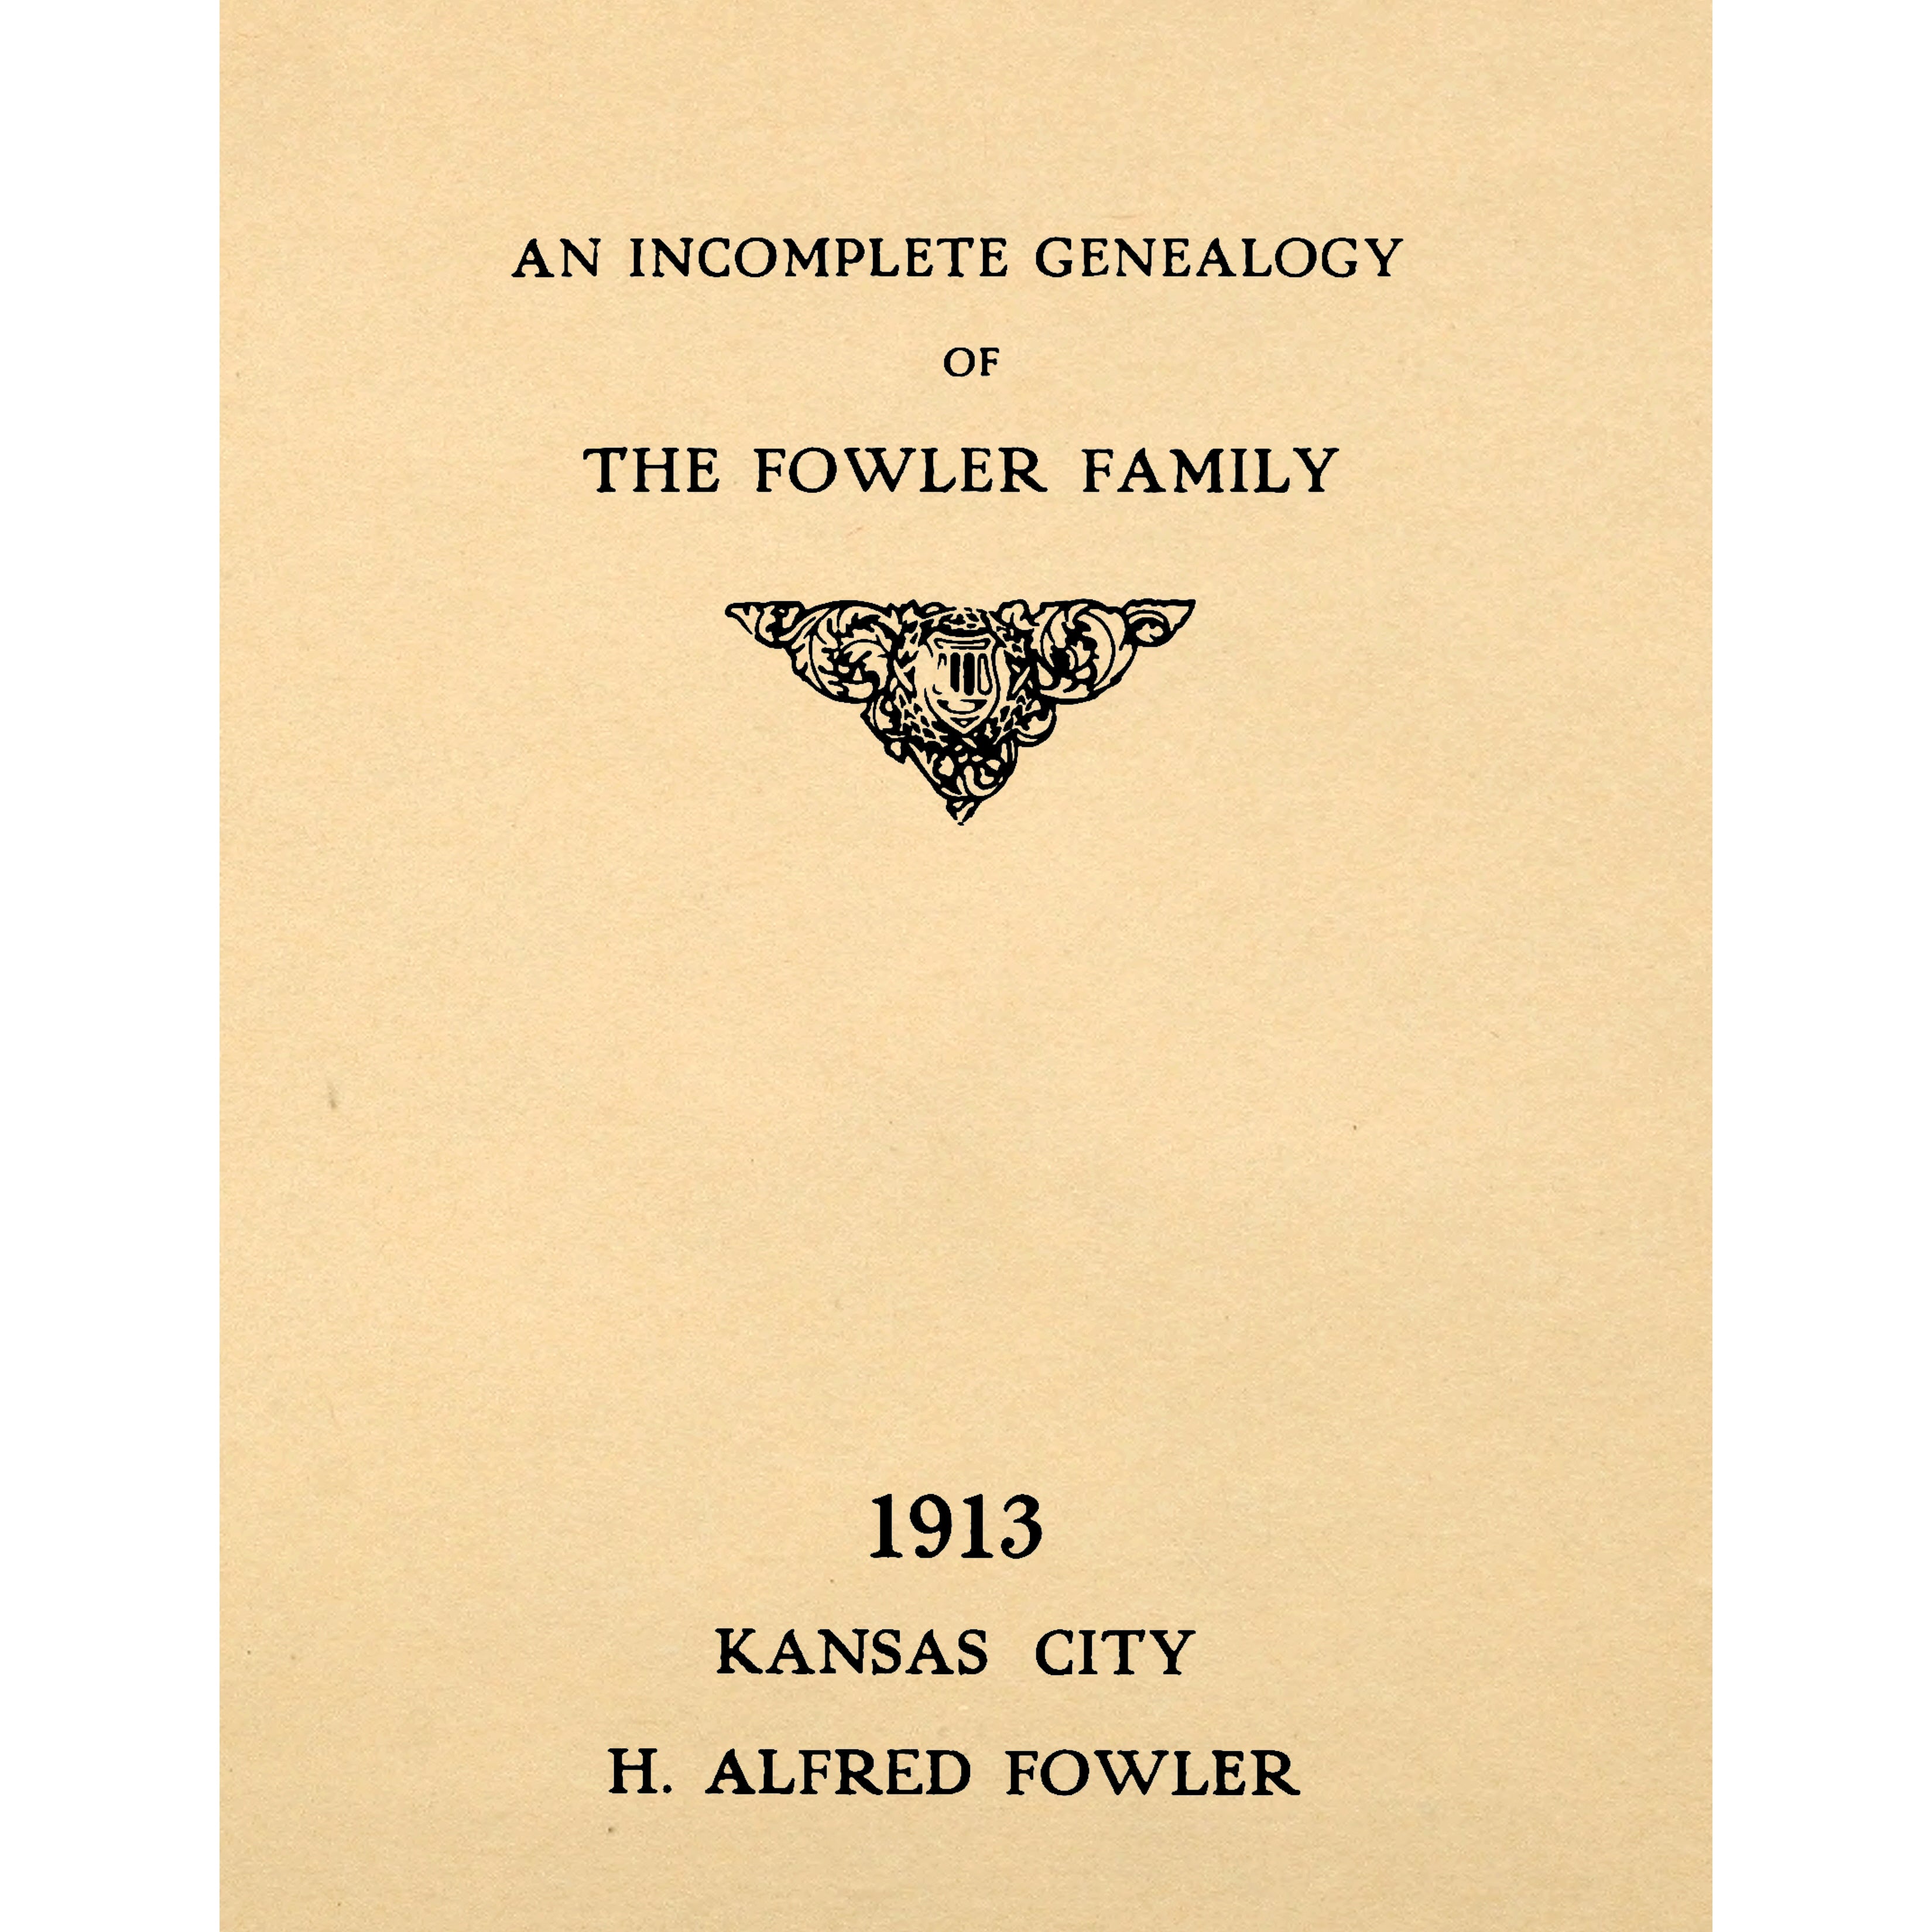 An incomplete genealogy of the Fowler family